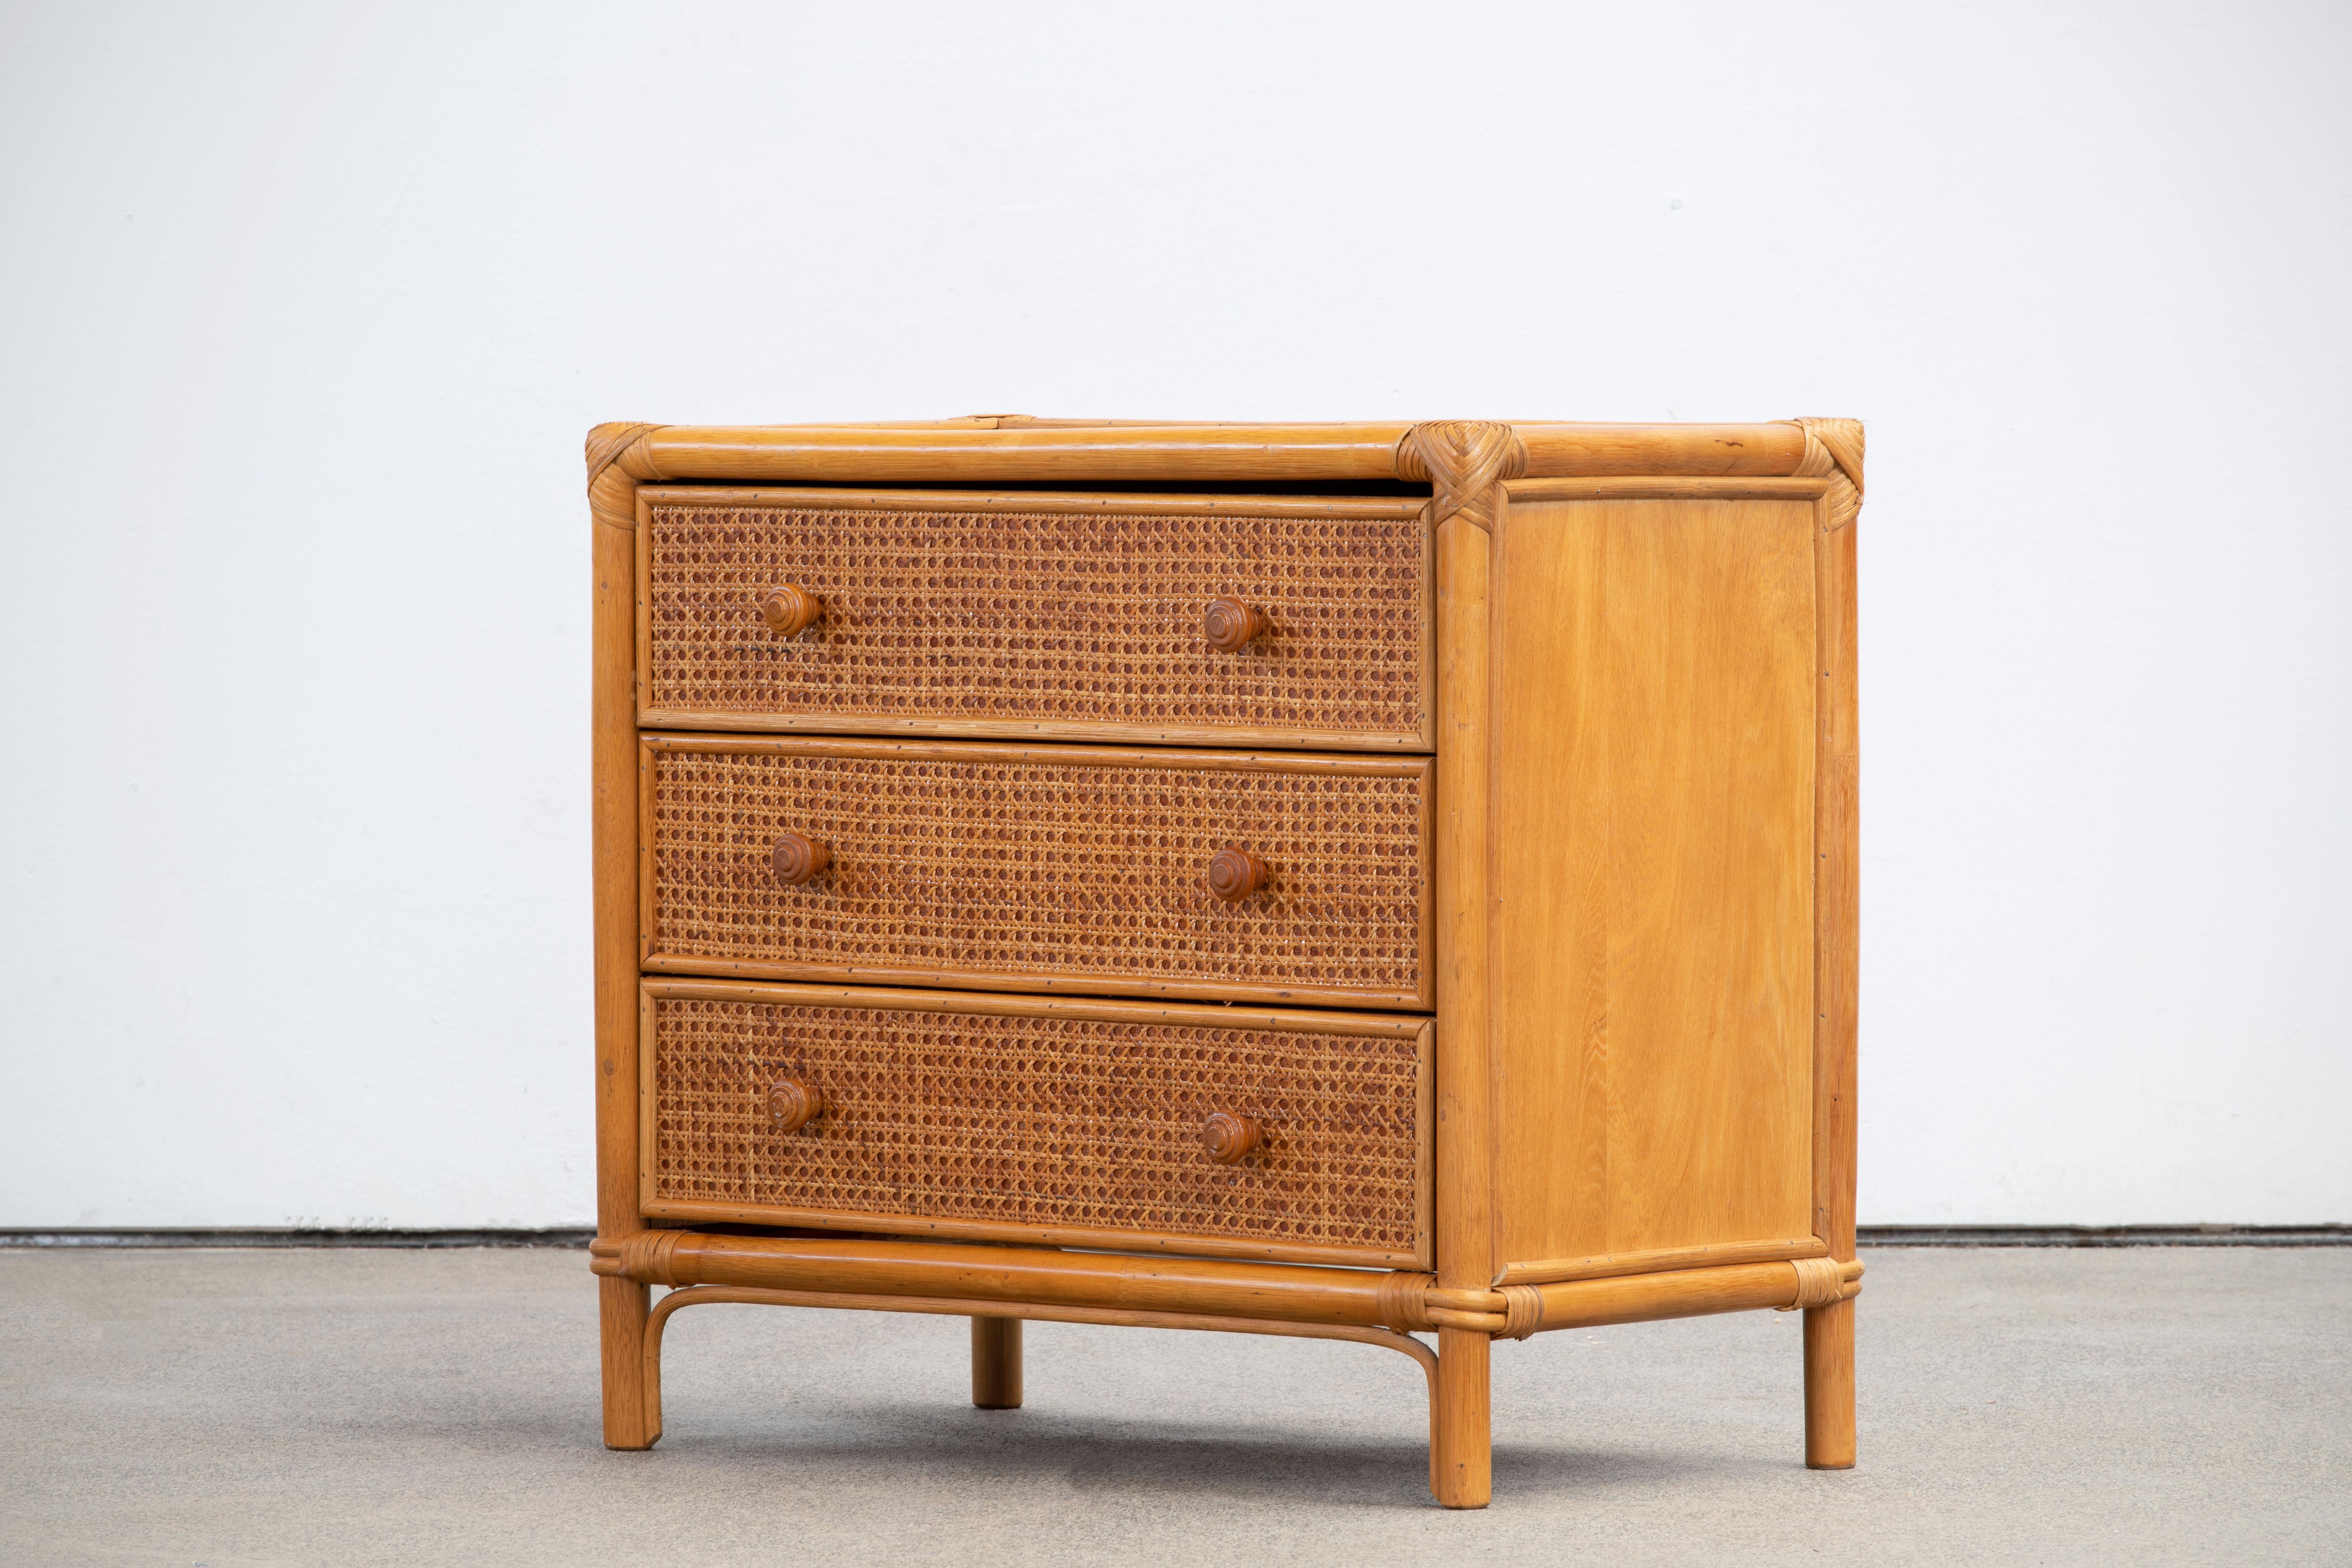 Amazing midcentury bamboo, Rattan and wicker desk with drawers. This wonderful piece was designed in Italy during the 1980s.

This writing table is unique because of the materials used, bamboo and rattan, and it has three drawers, a large one and